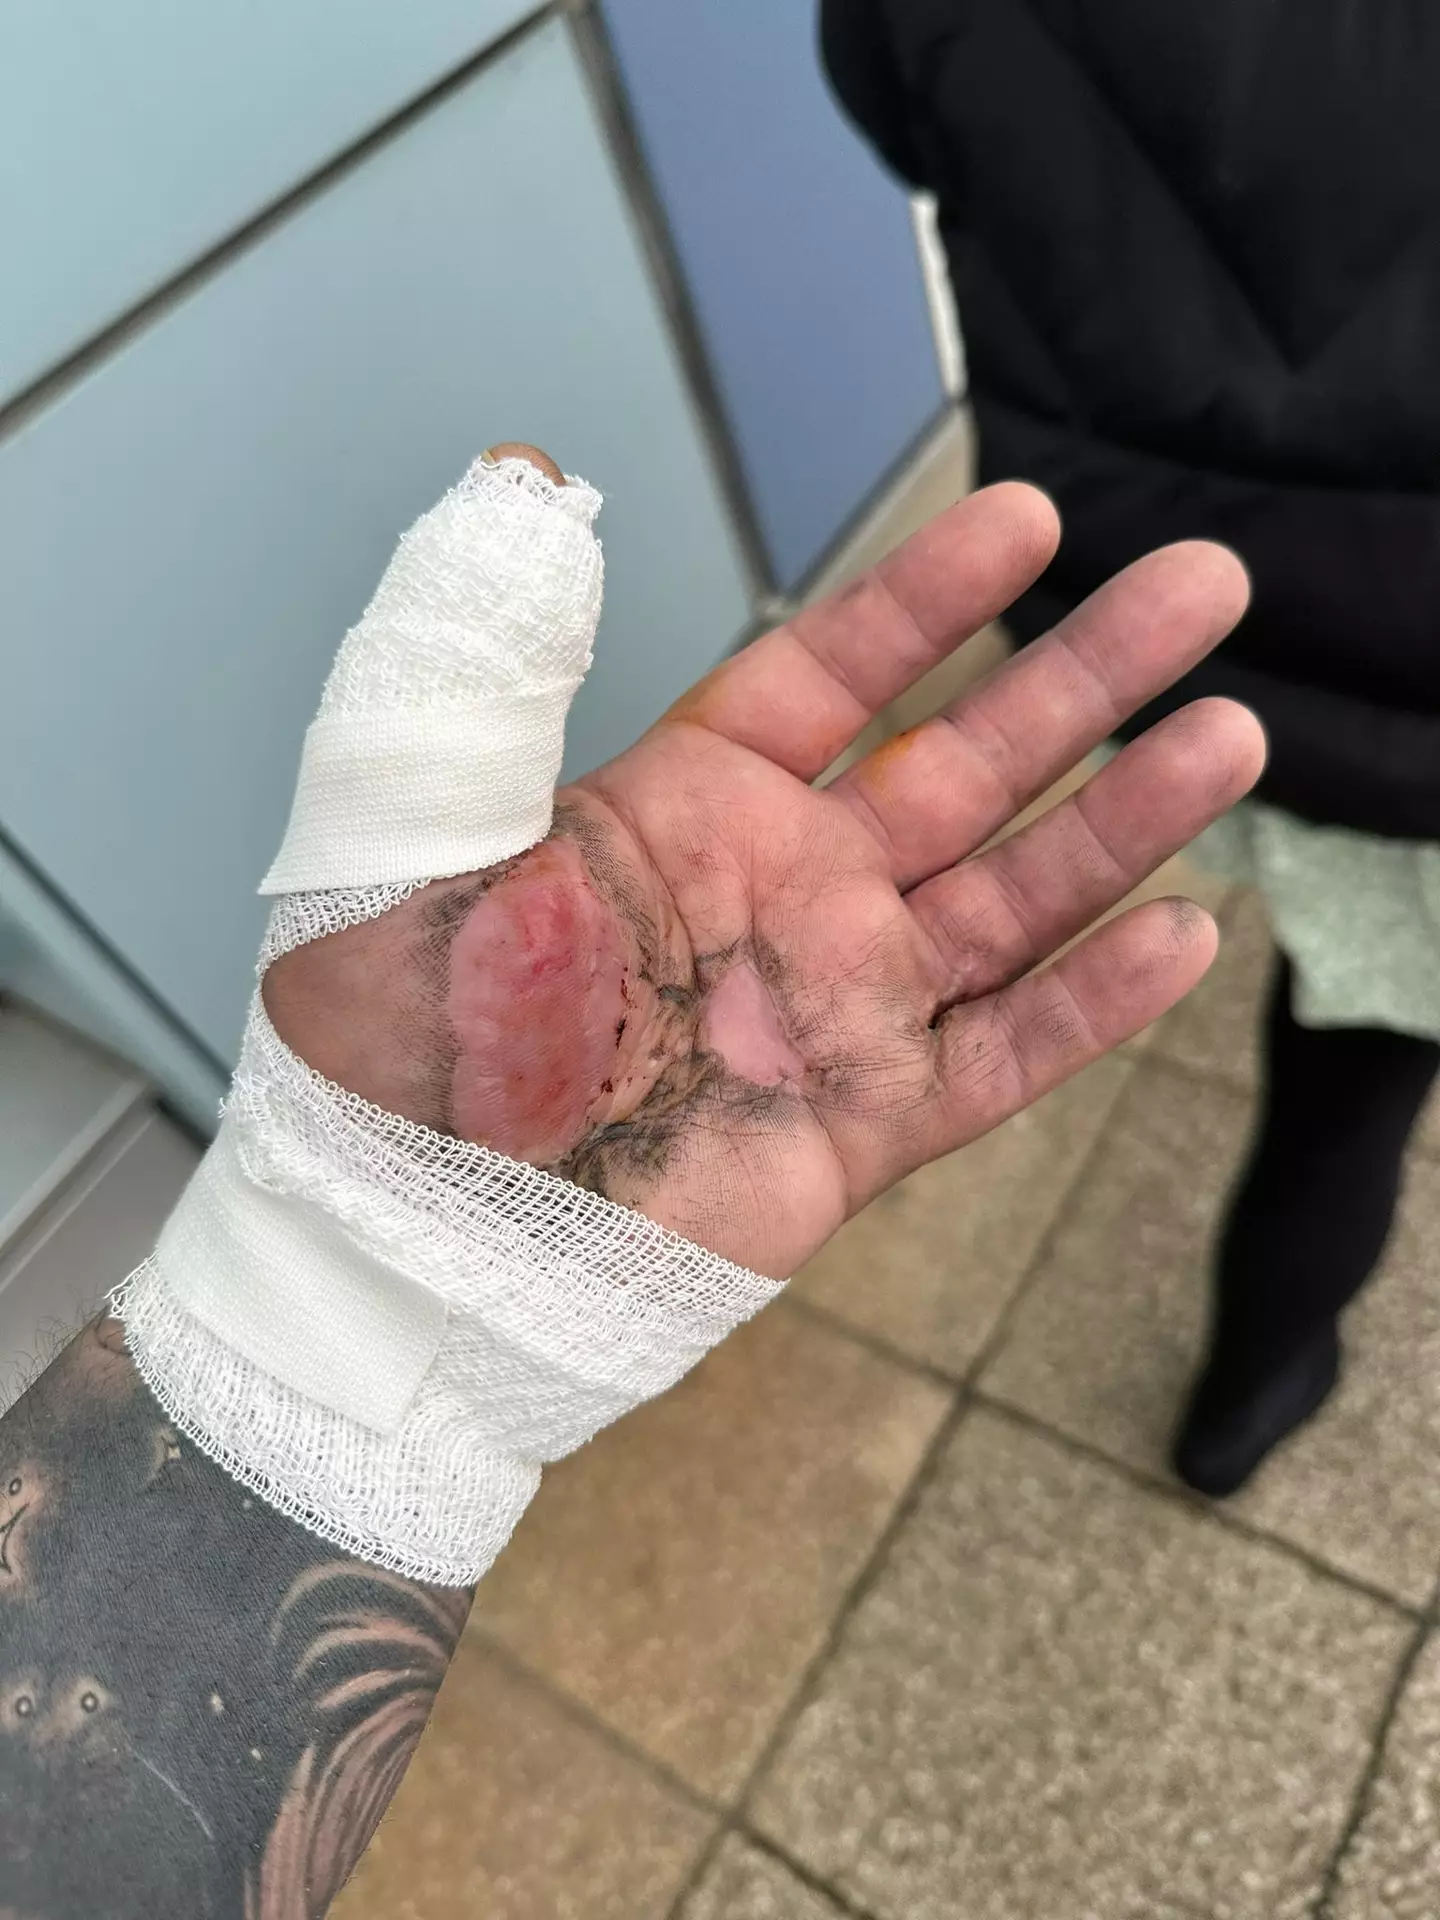 The lorry driver suffered horrible injuries including horrendous burns to his hand.